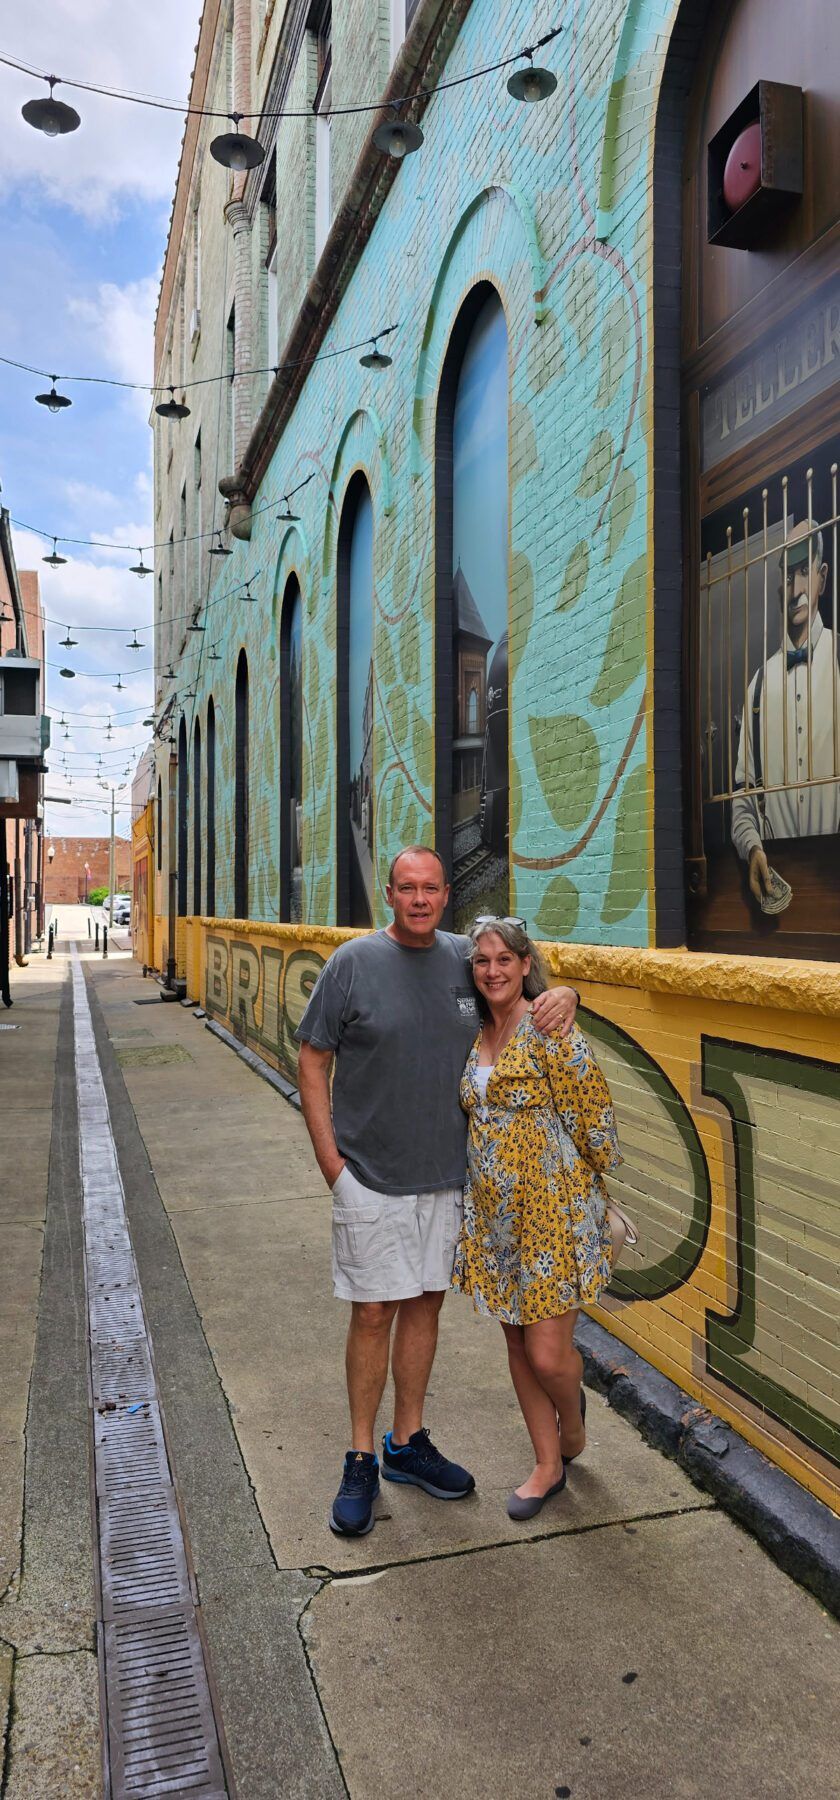 "Kathy and Steve Brown, 50 plus travel bloggers, posing in front of a vibrant downtown mural in Bristol, Virginia during their road trip."